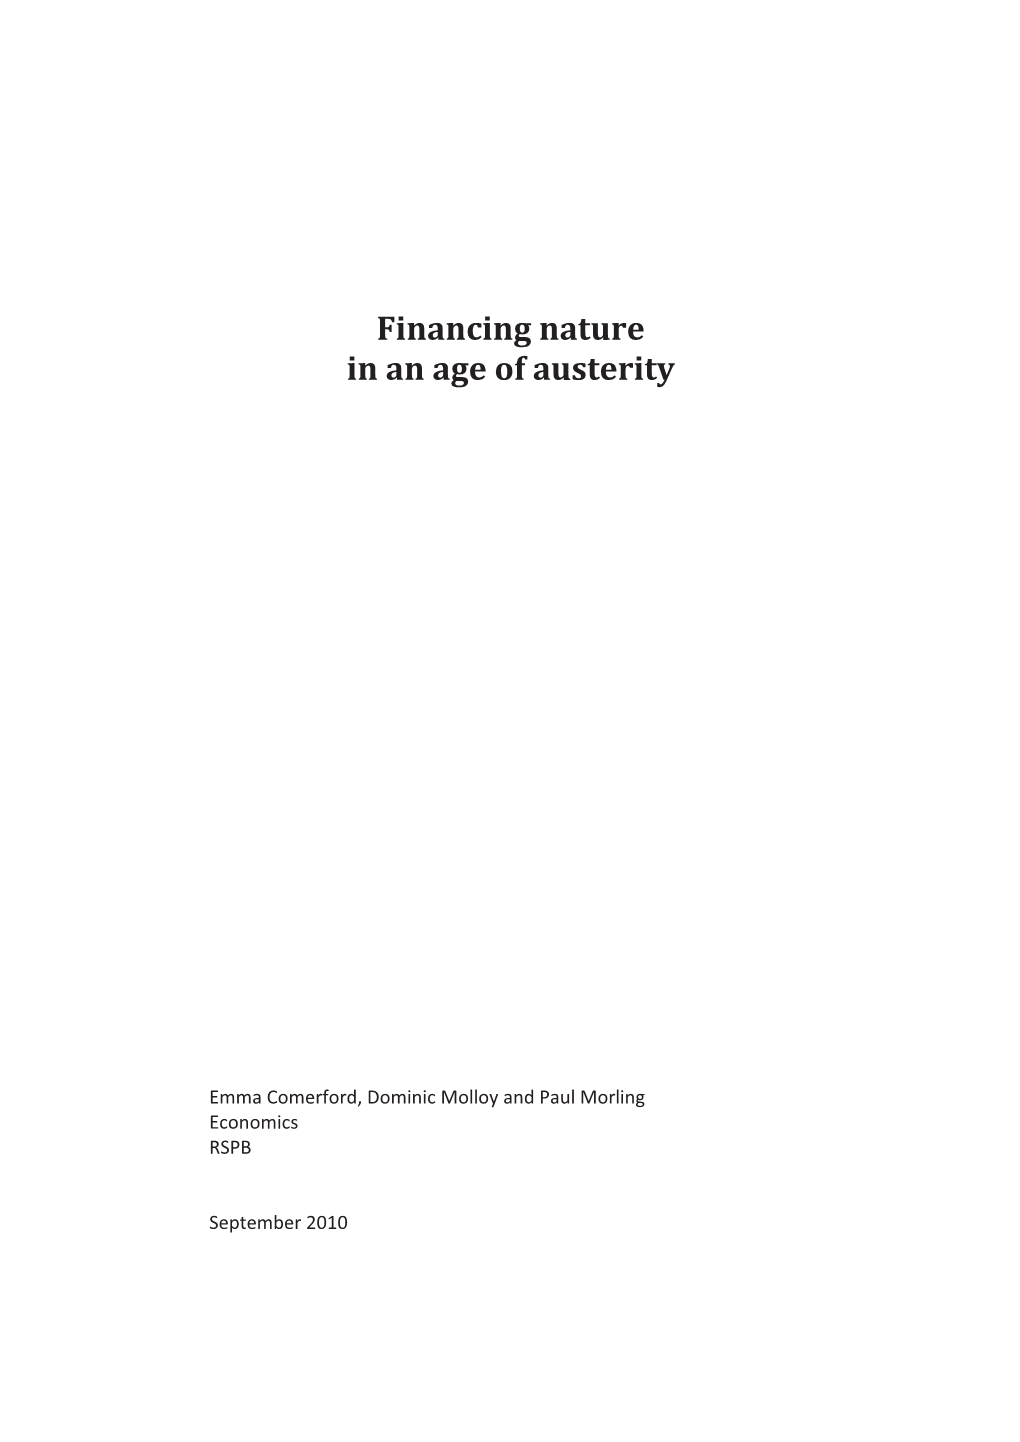 Financing Nature in the Age of Austerity